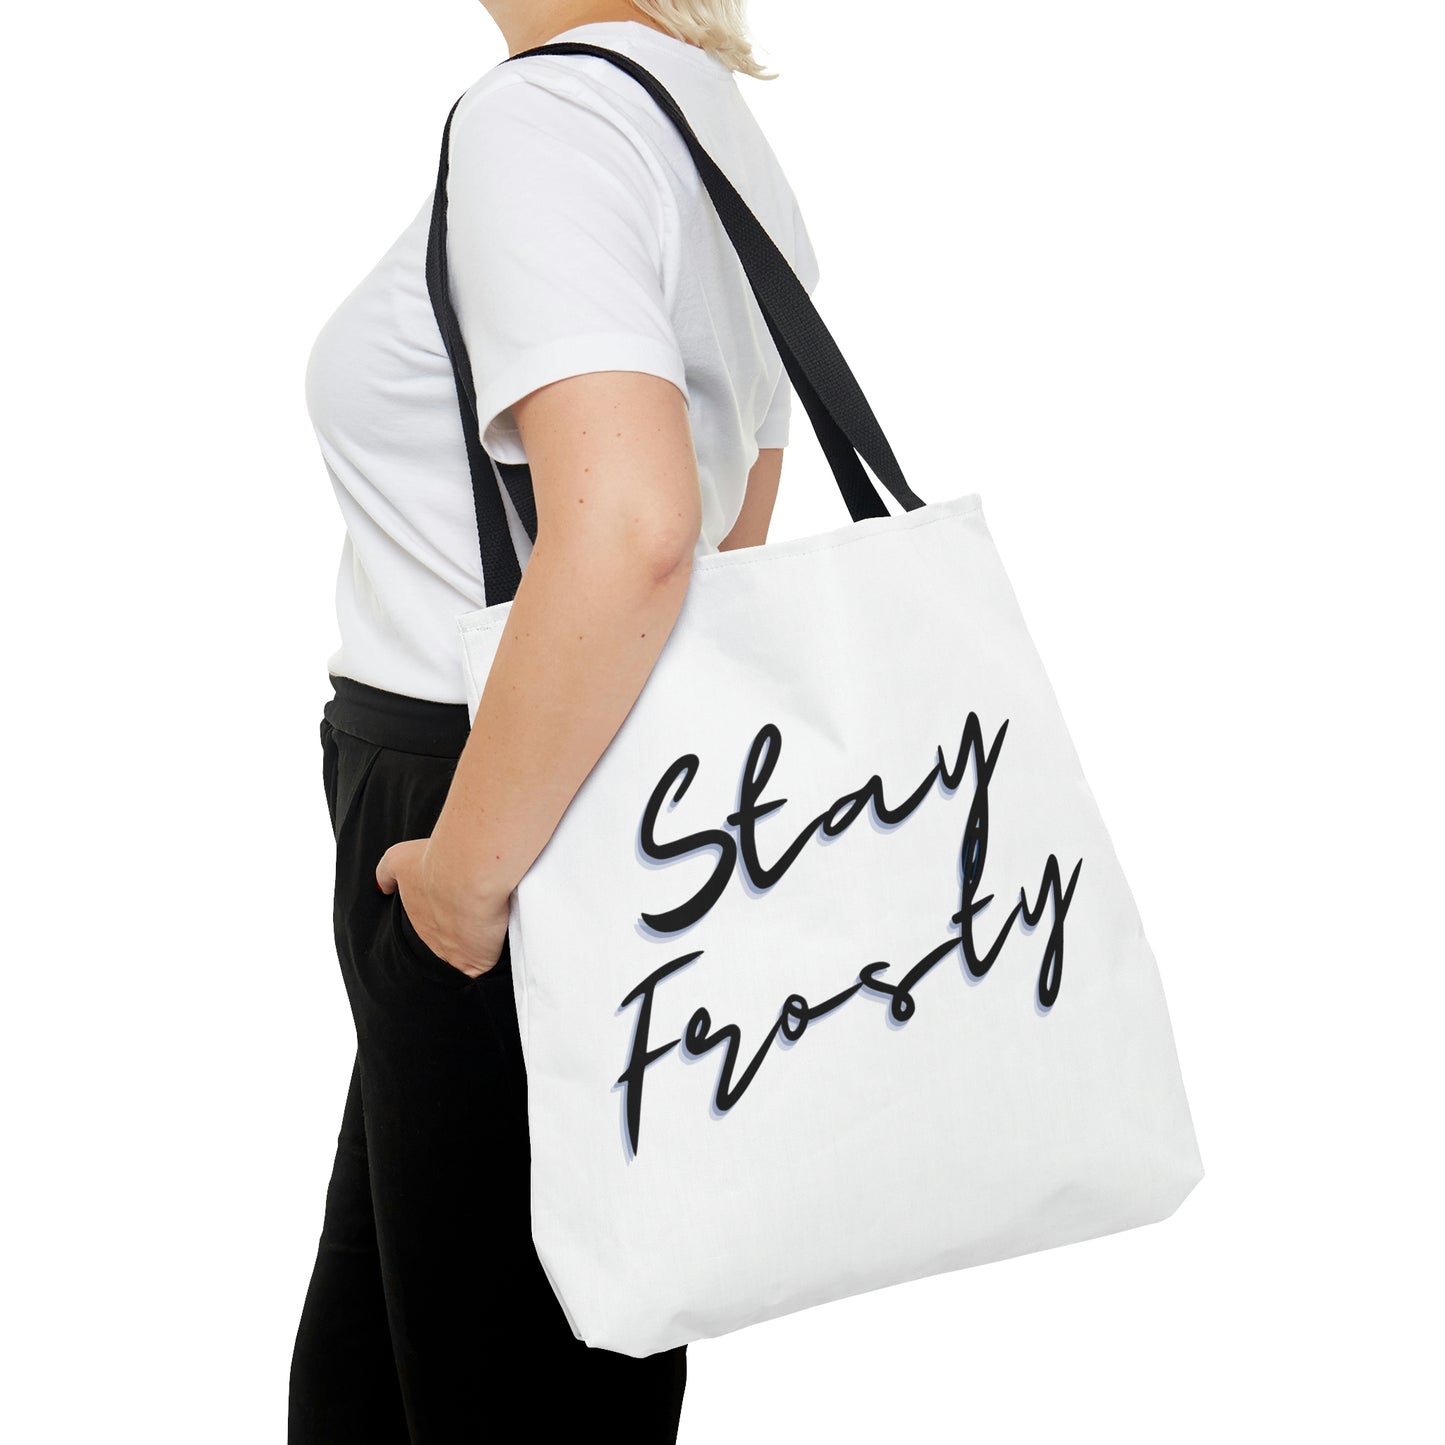 A woman is looking so cool wearing the Stay Frosty White Weed Tote Bag